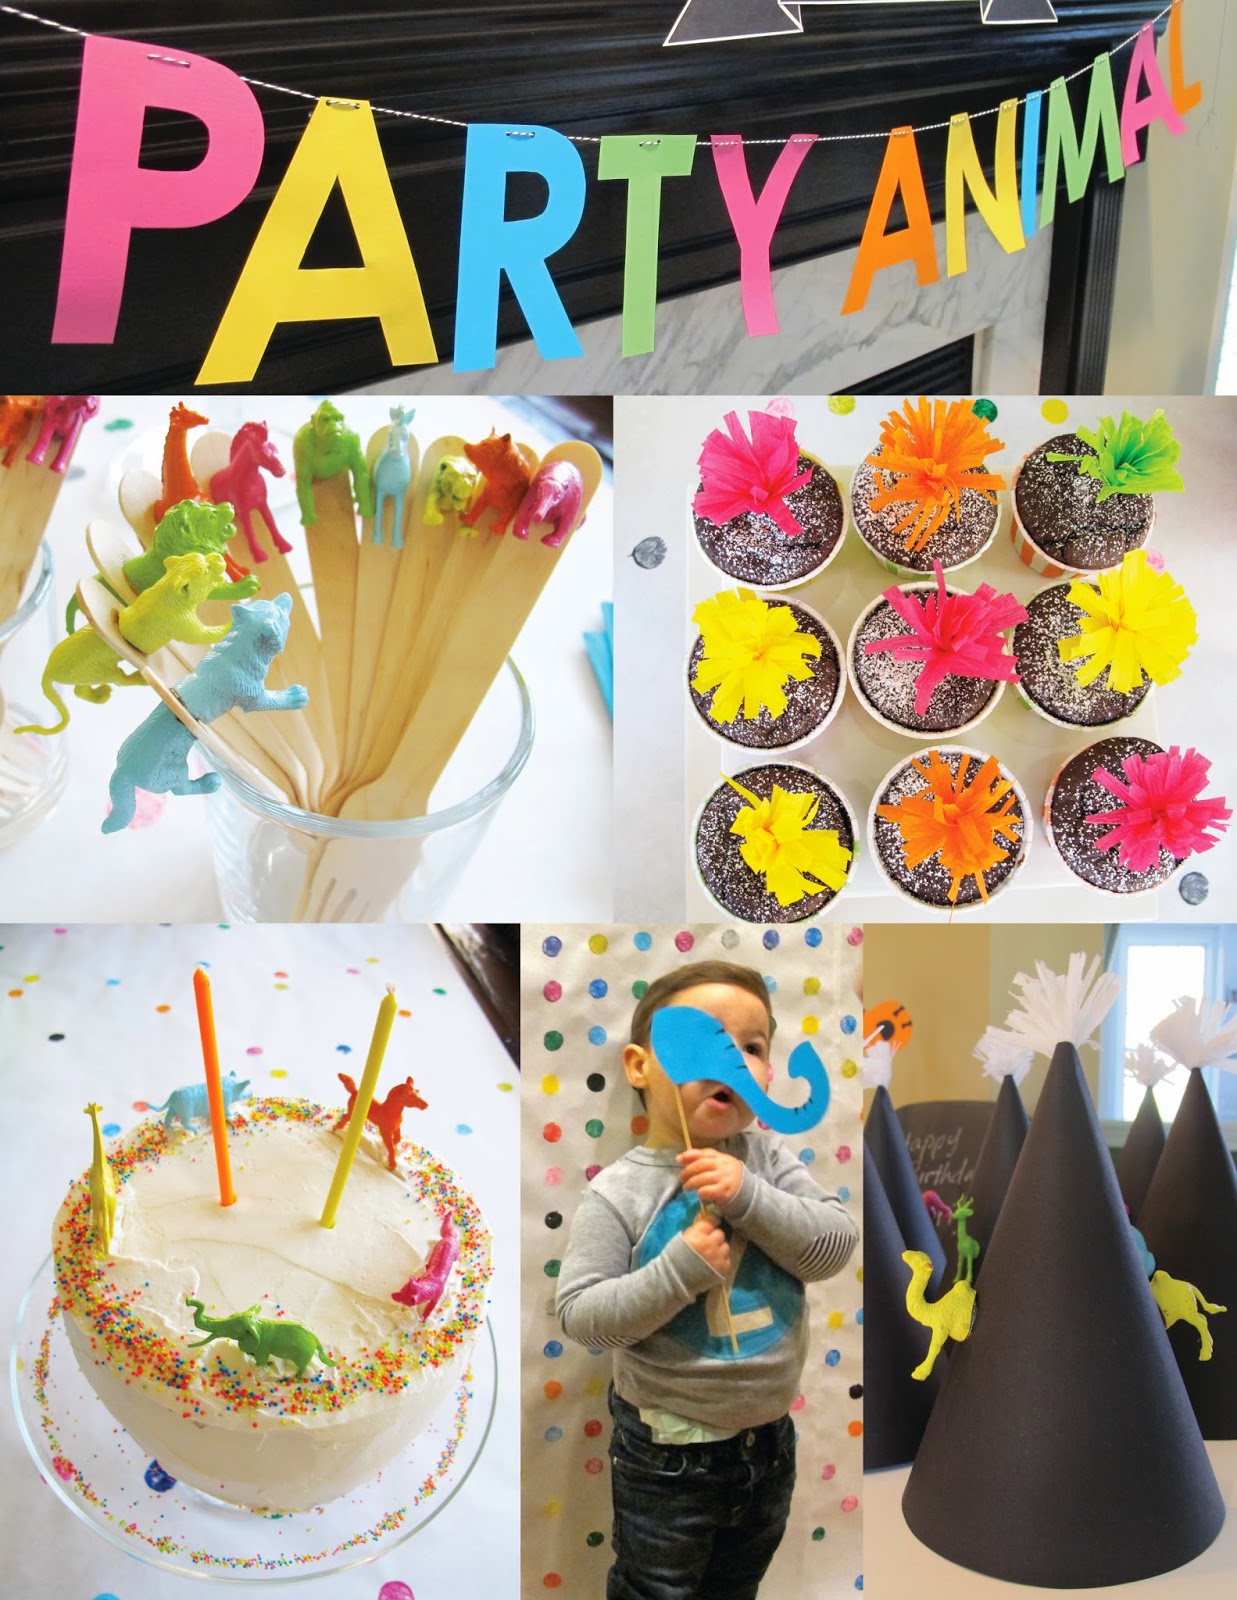 ARI’S ANIMAL THEMED PARTY: PART 1